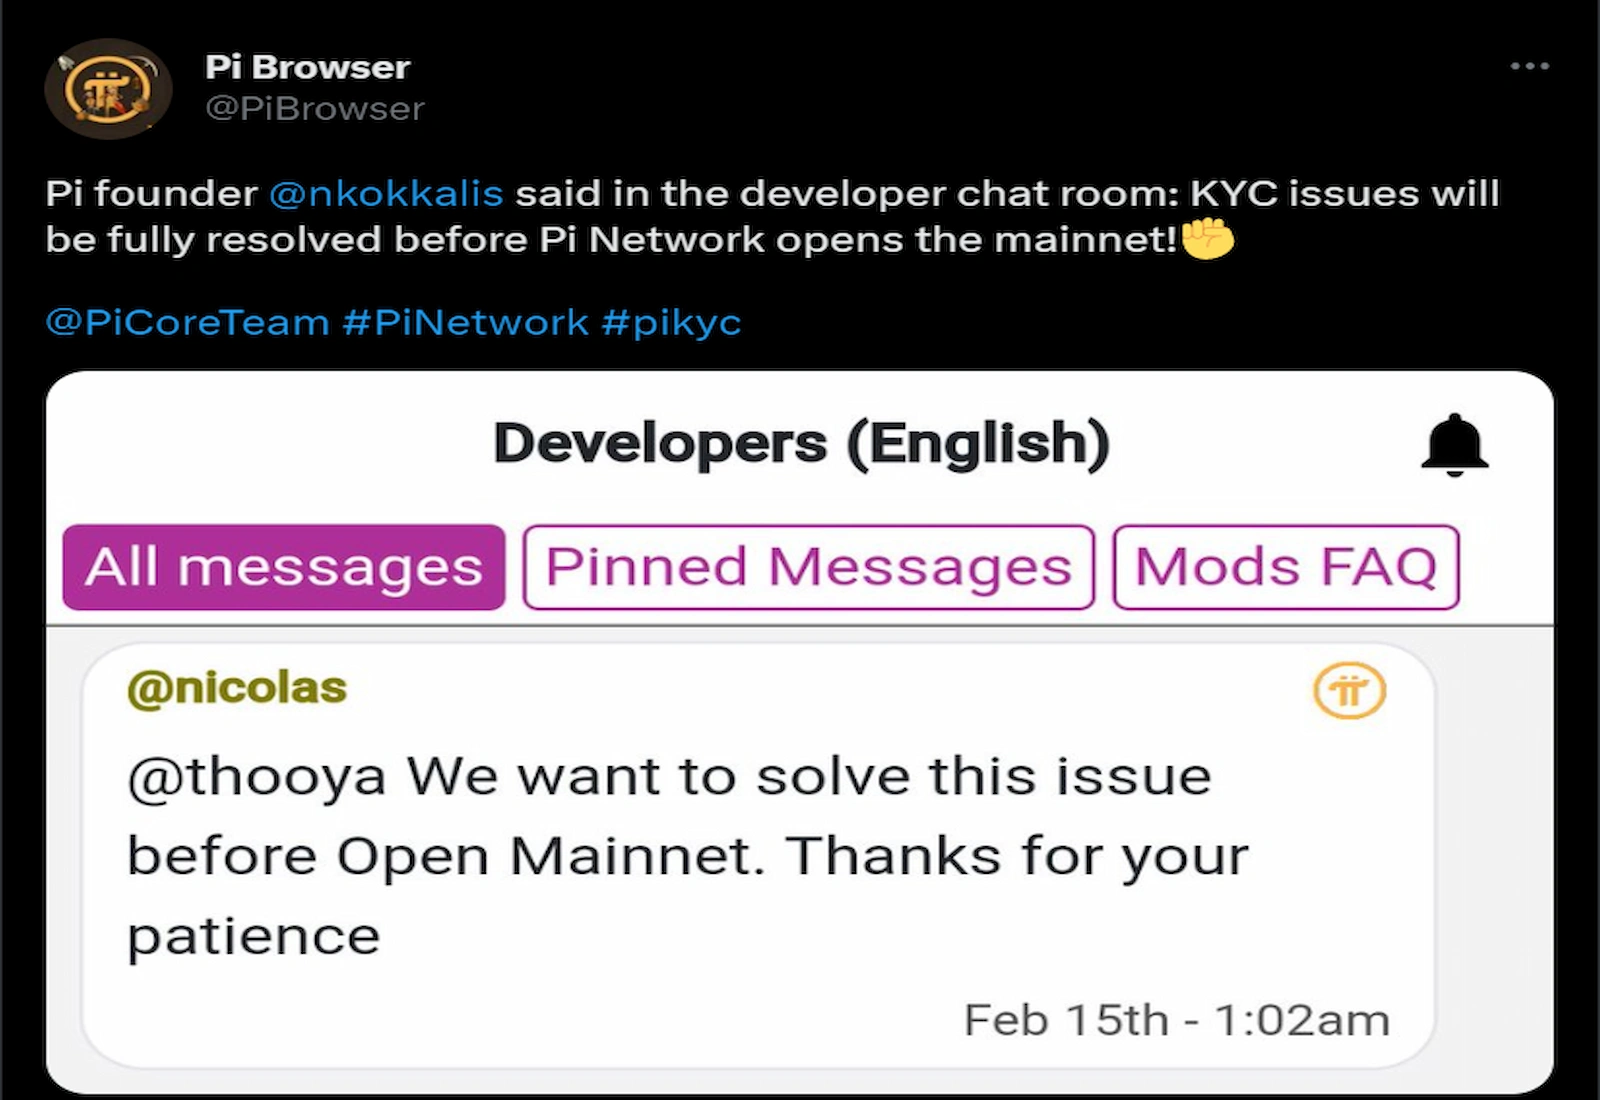 Pi Network co-founder Nicolas Kokkalis claimed that the KYC issues are the only hindrance to the Pi Network open mainnet.